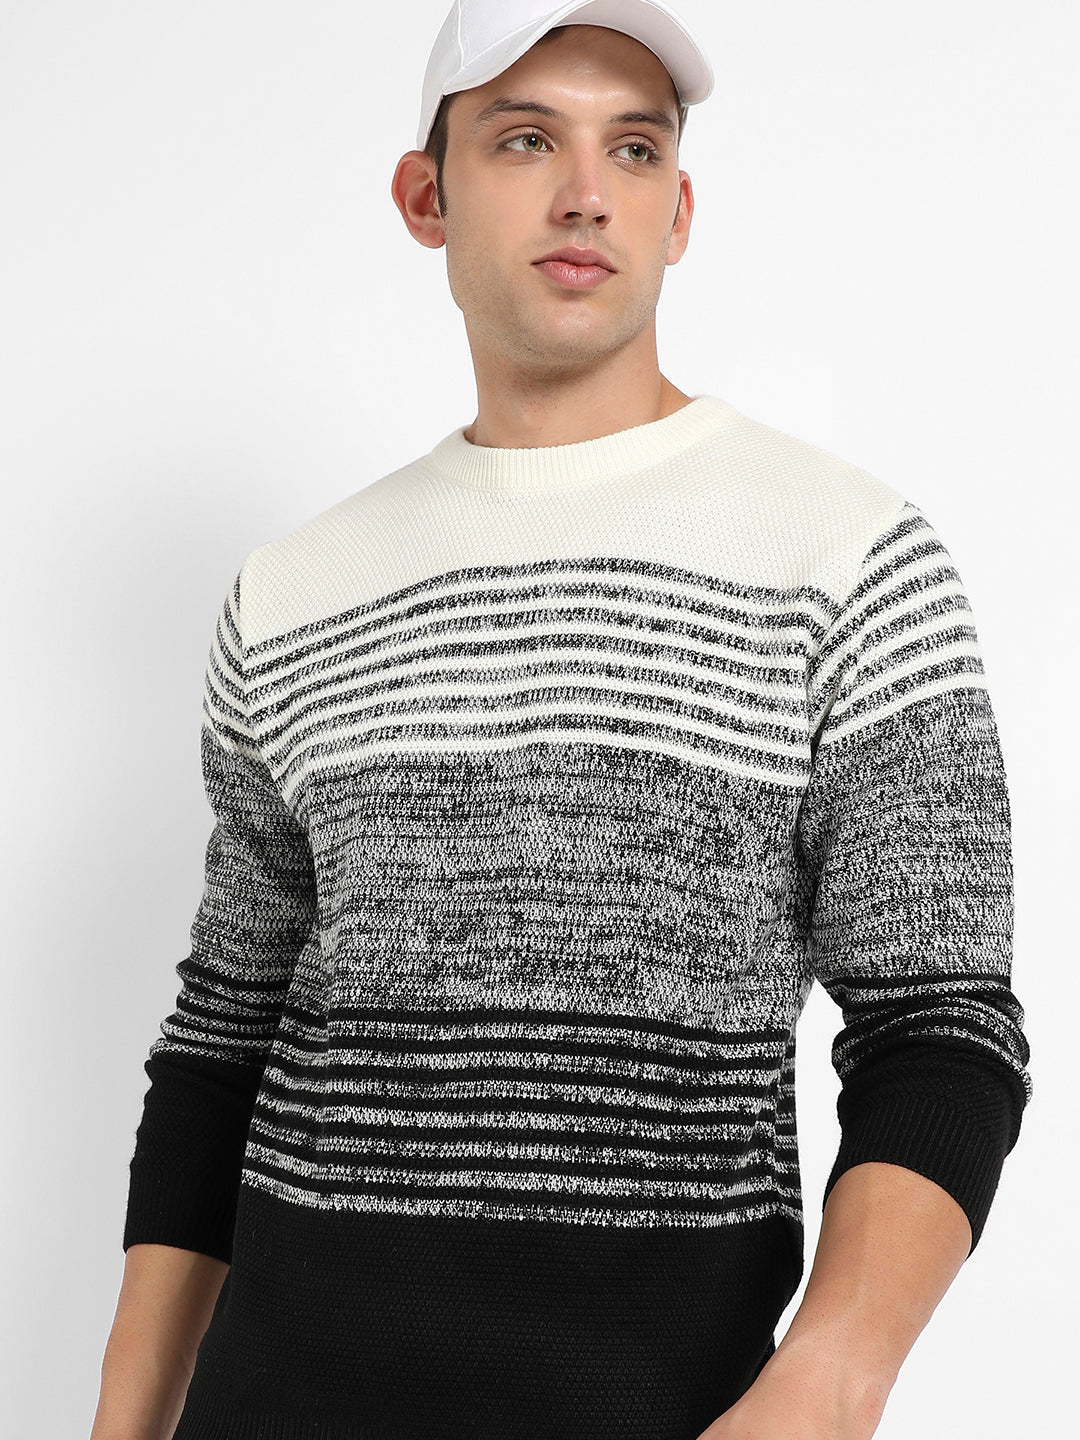 Contrast Horizontal Striped Pullover Sweater